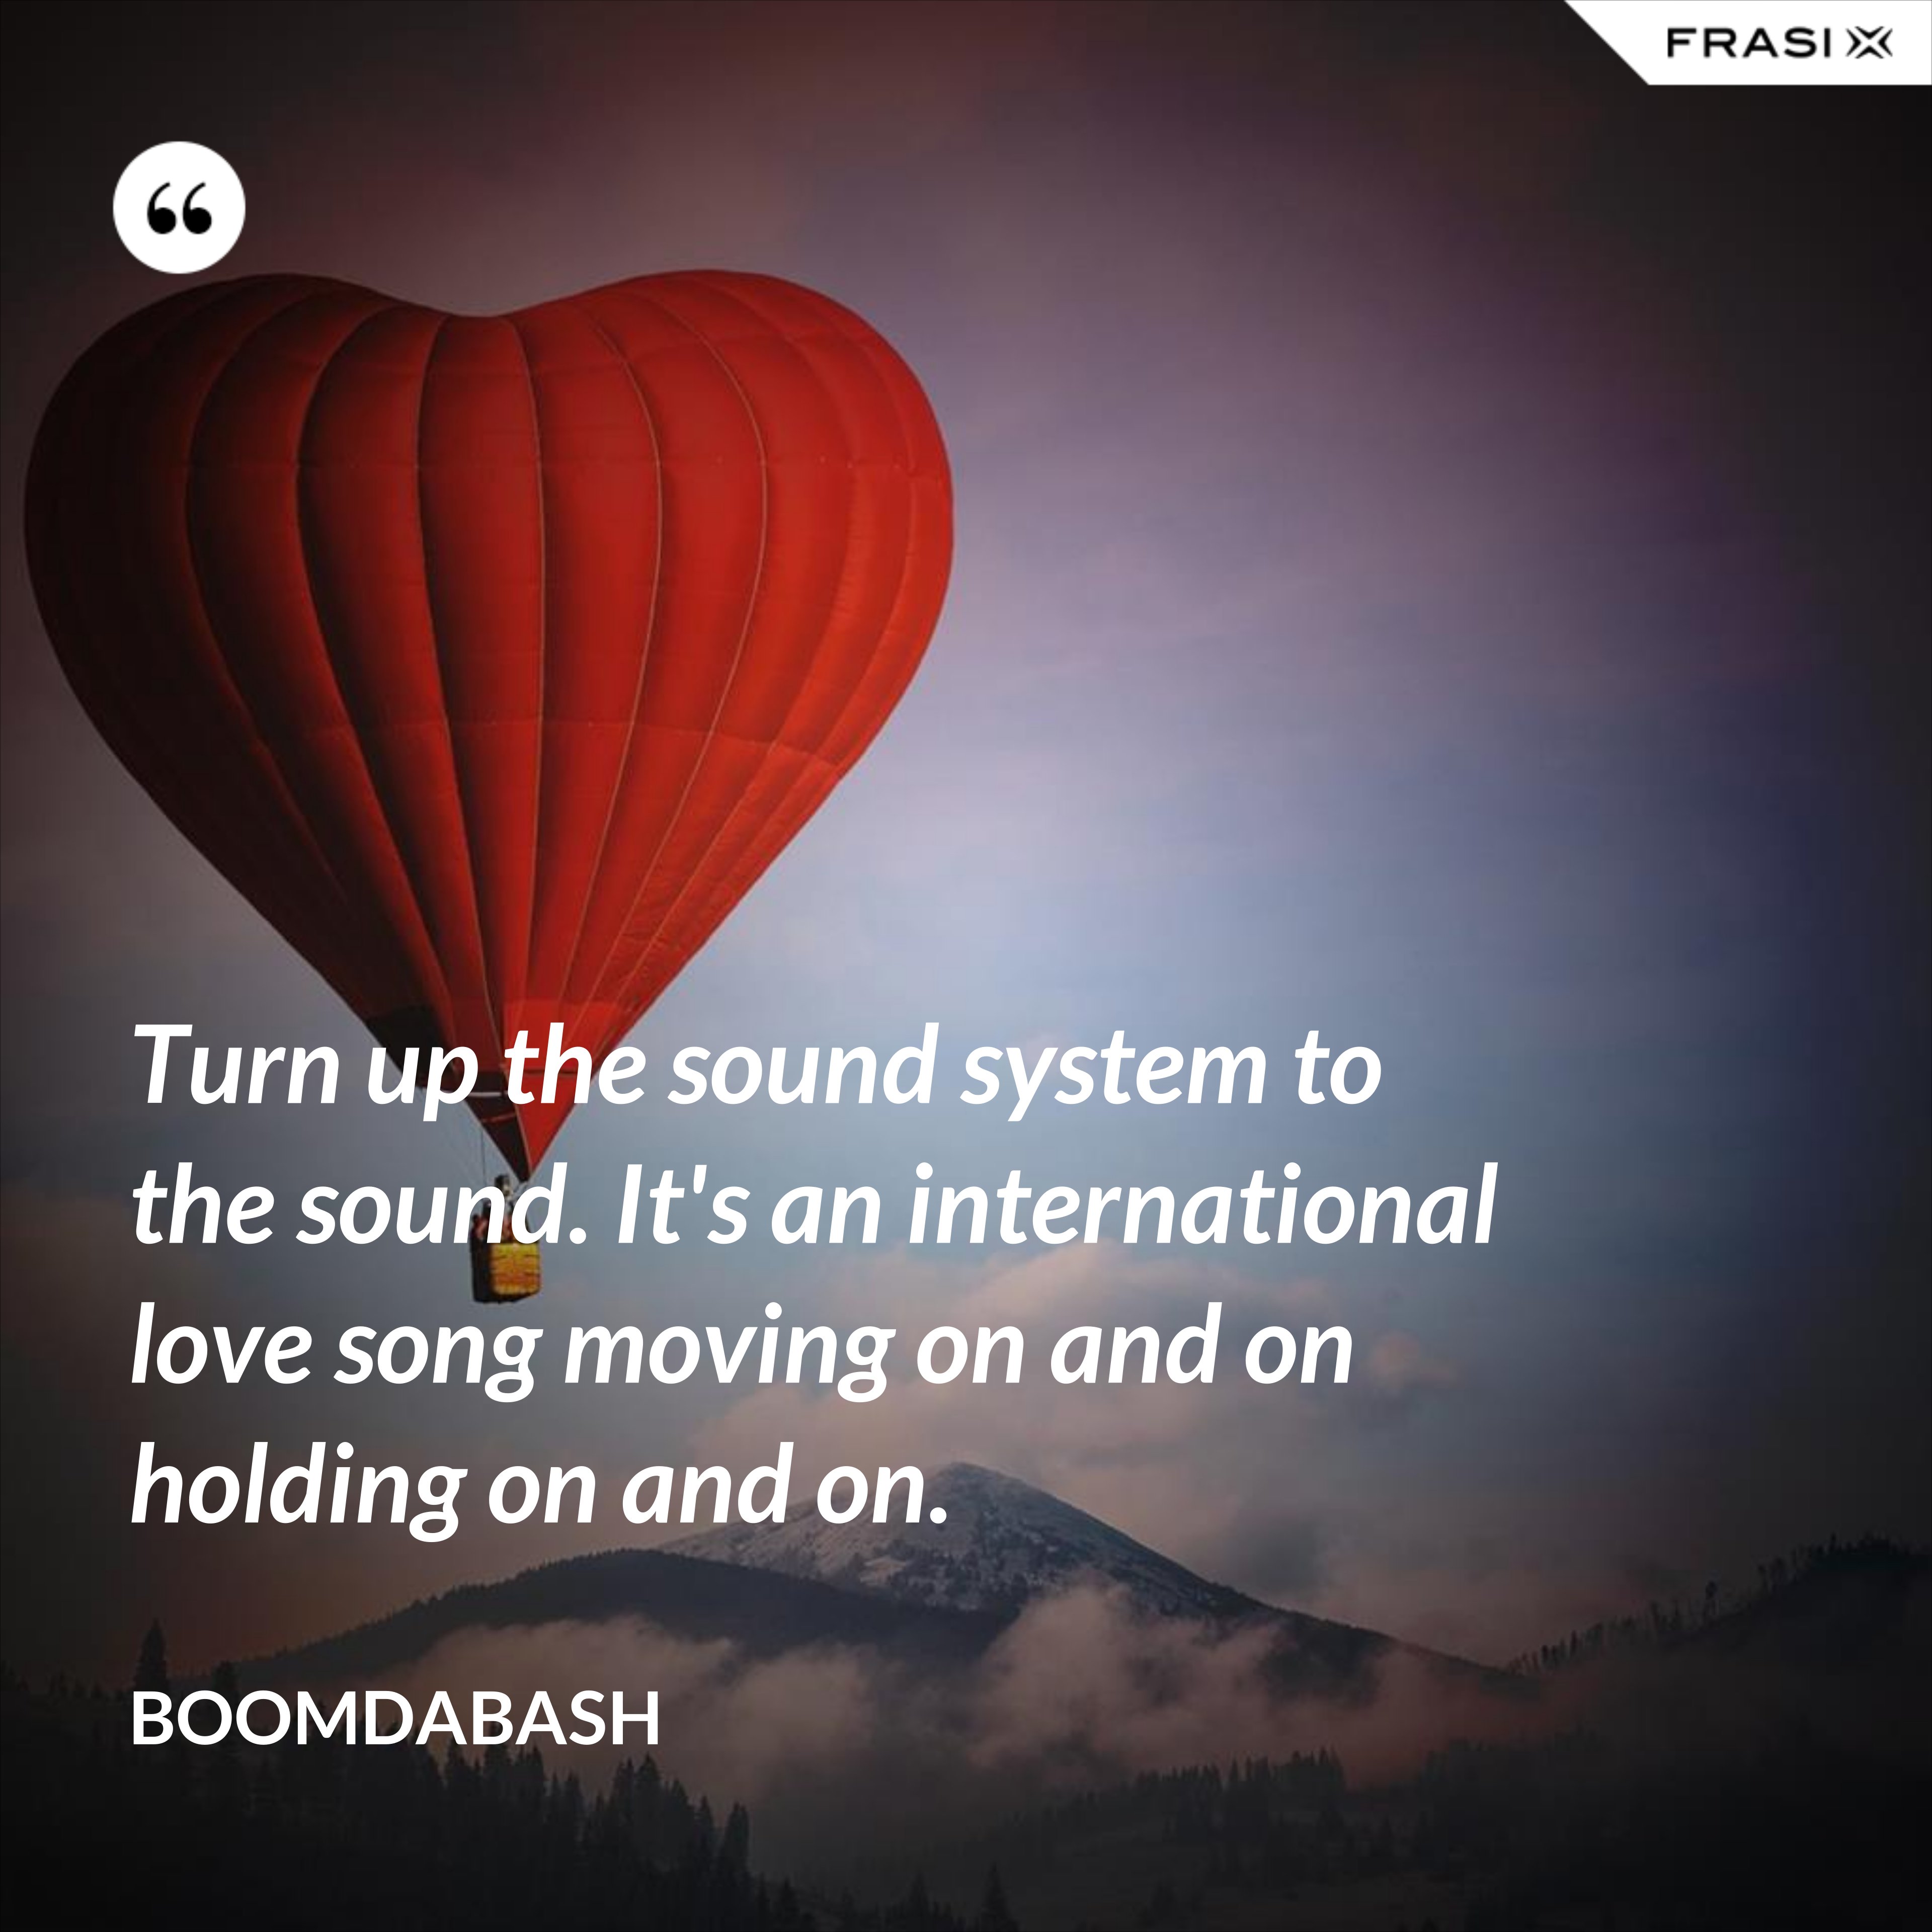 Turn up the sound system to the sound. It's an international love song moving on and on holding on and on. - Boomdabash